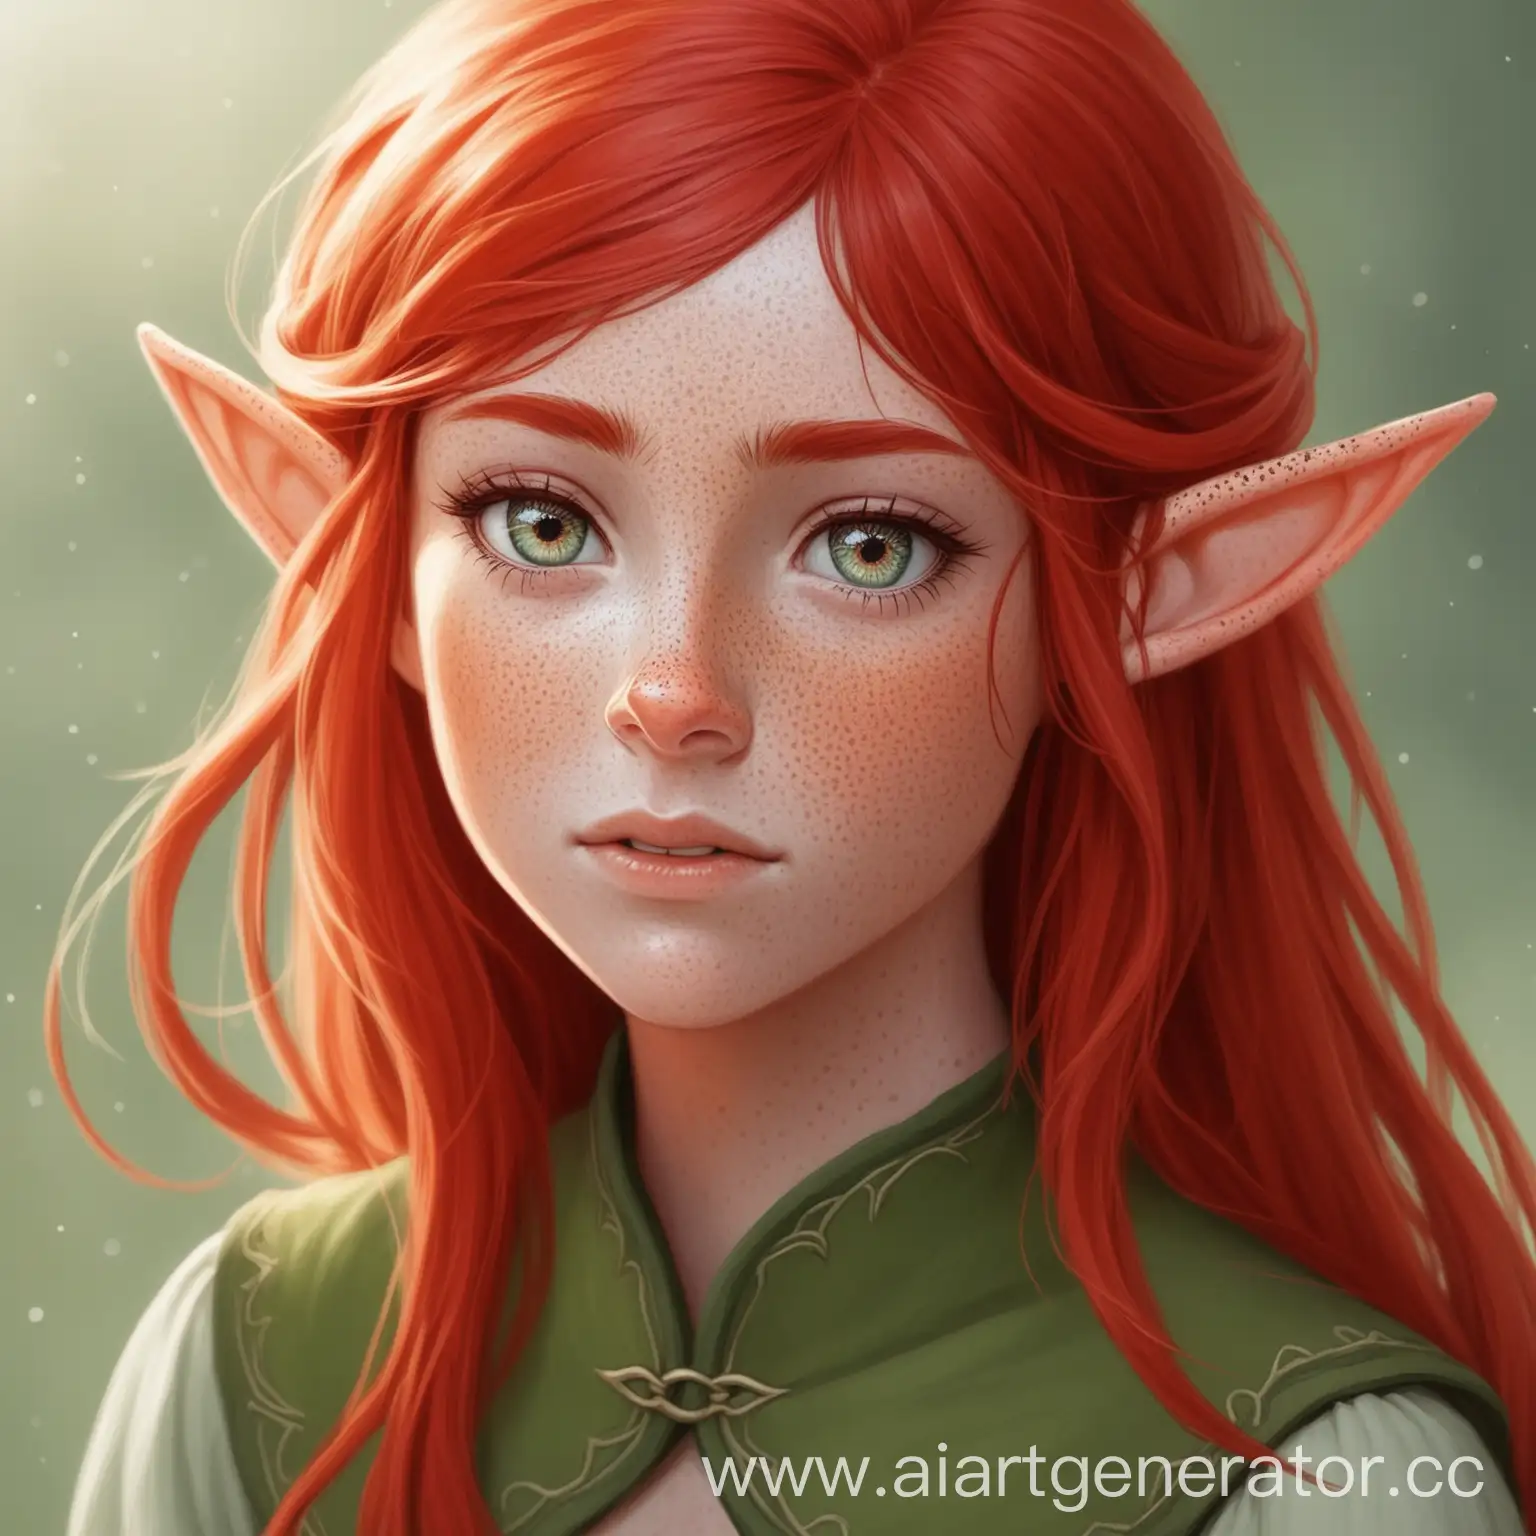 RedHaired-Freckled-Elf-in-Enchanted-Forest